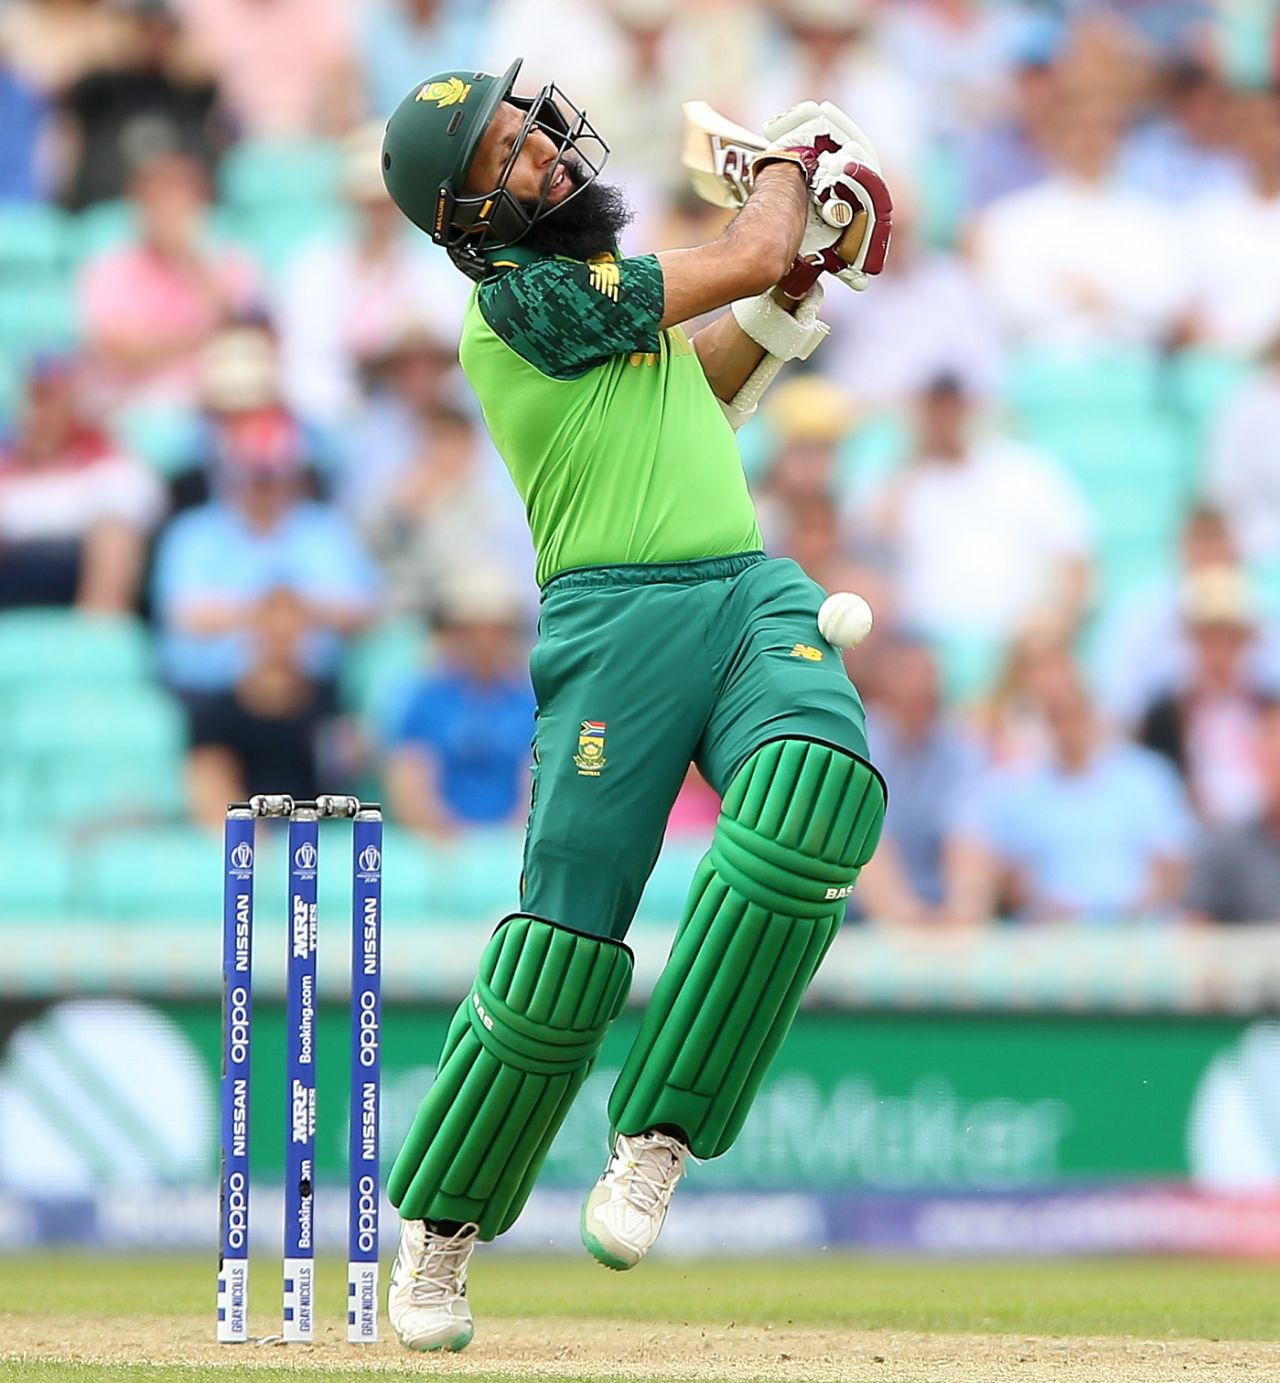 Hashim Amla struck by a Jofra Archer bouncer to the helmet, England v South Africa, World Cup 2019, The Oval, May 30, 2019